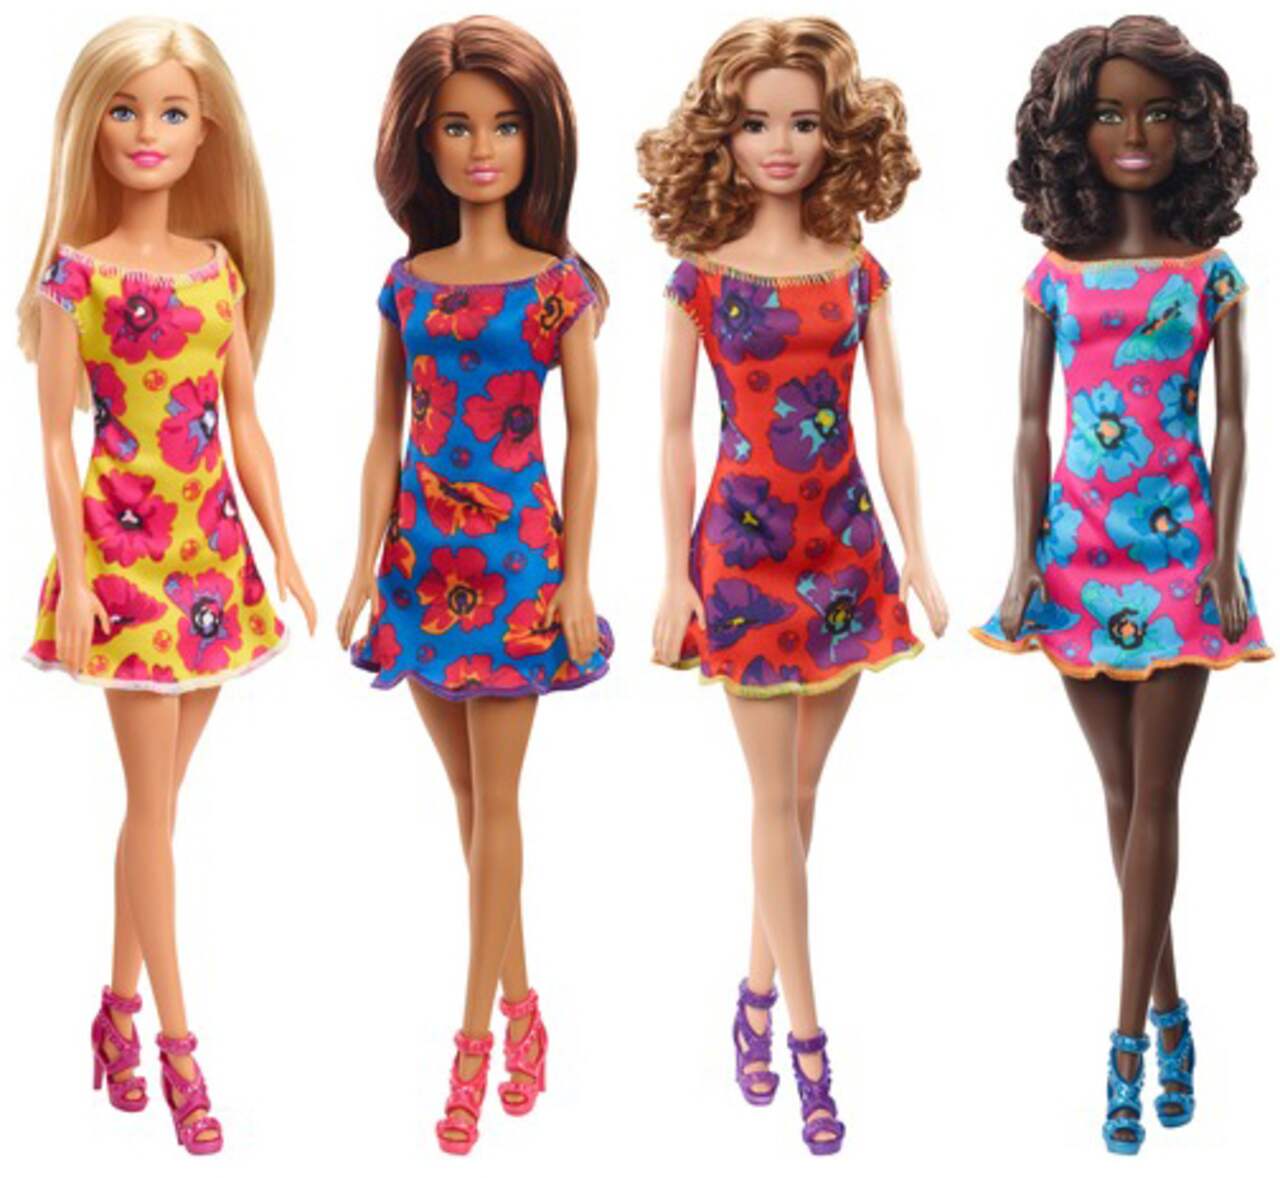 Mattel Barbie® Doll Toys w/Trendy Floral Outfit, Assorted, Ages 5+